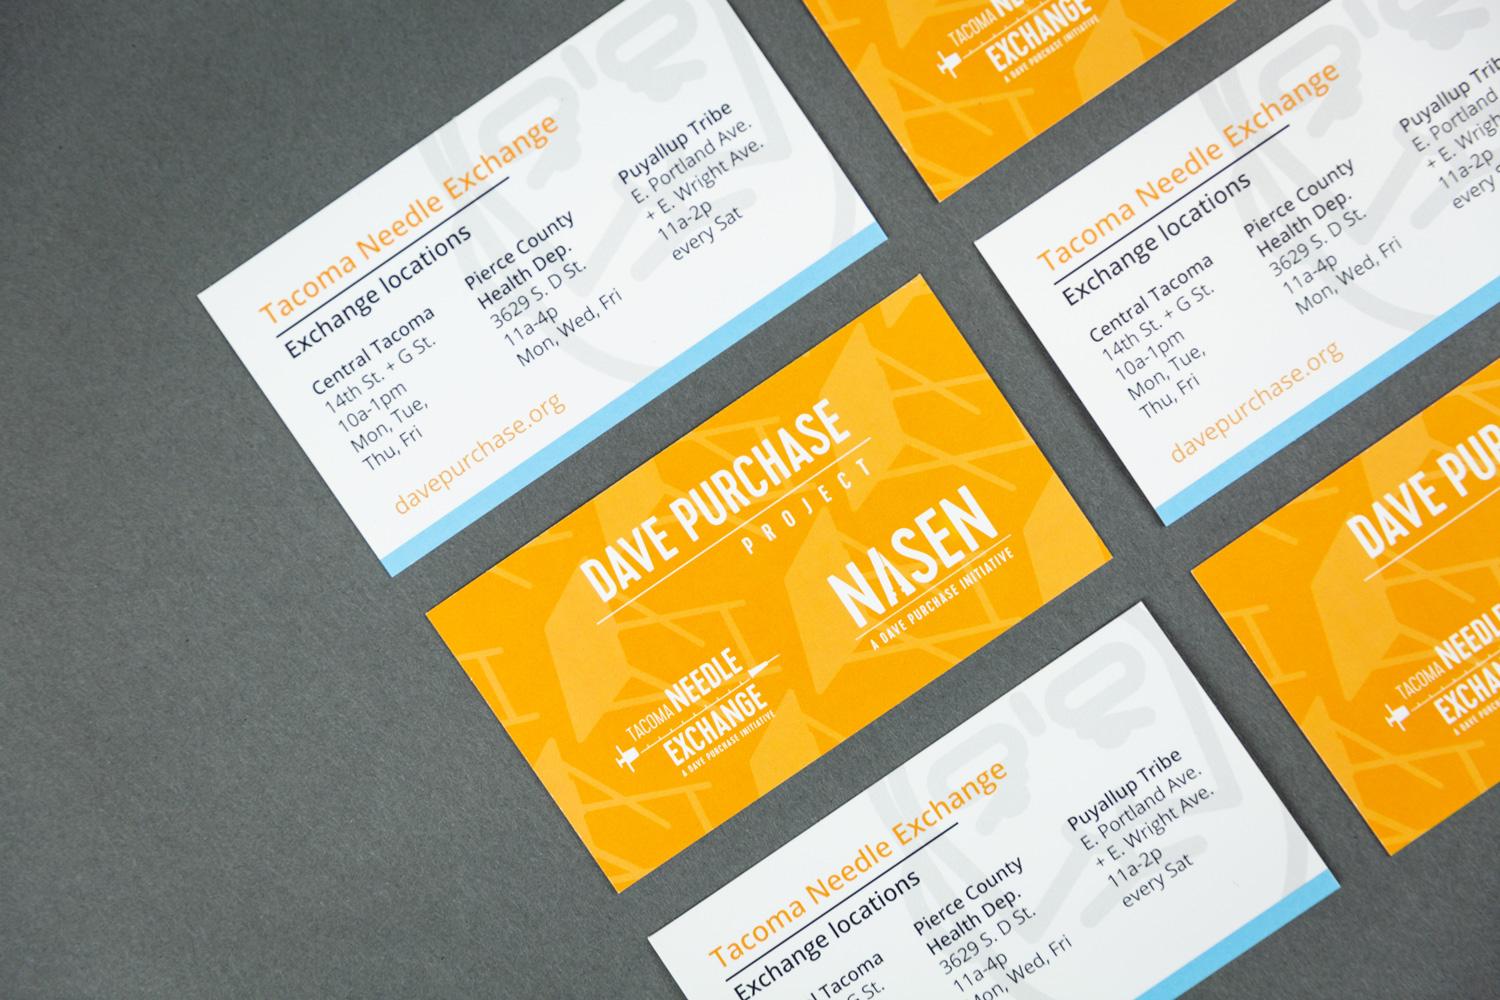 Dave Purchase Business Cards